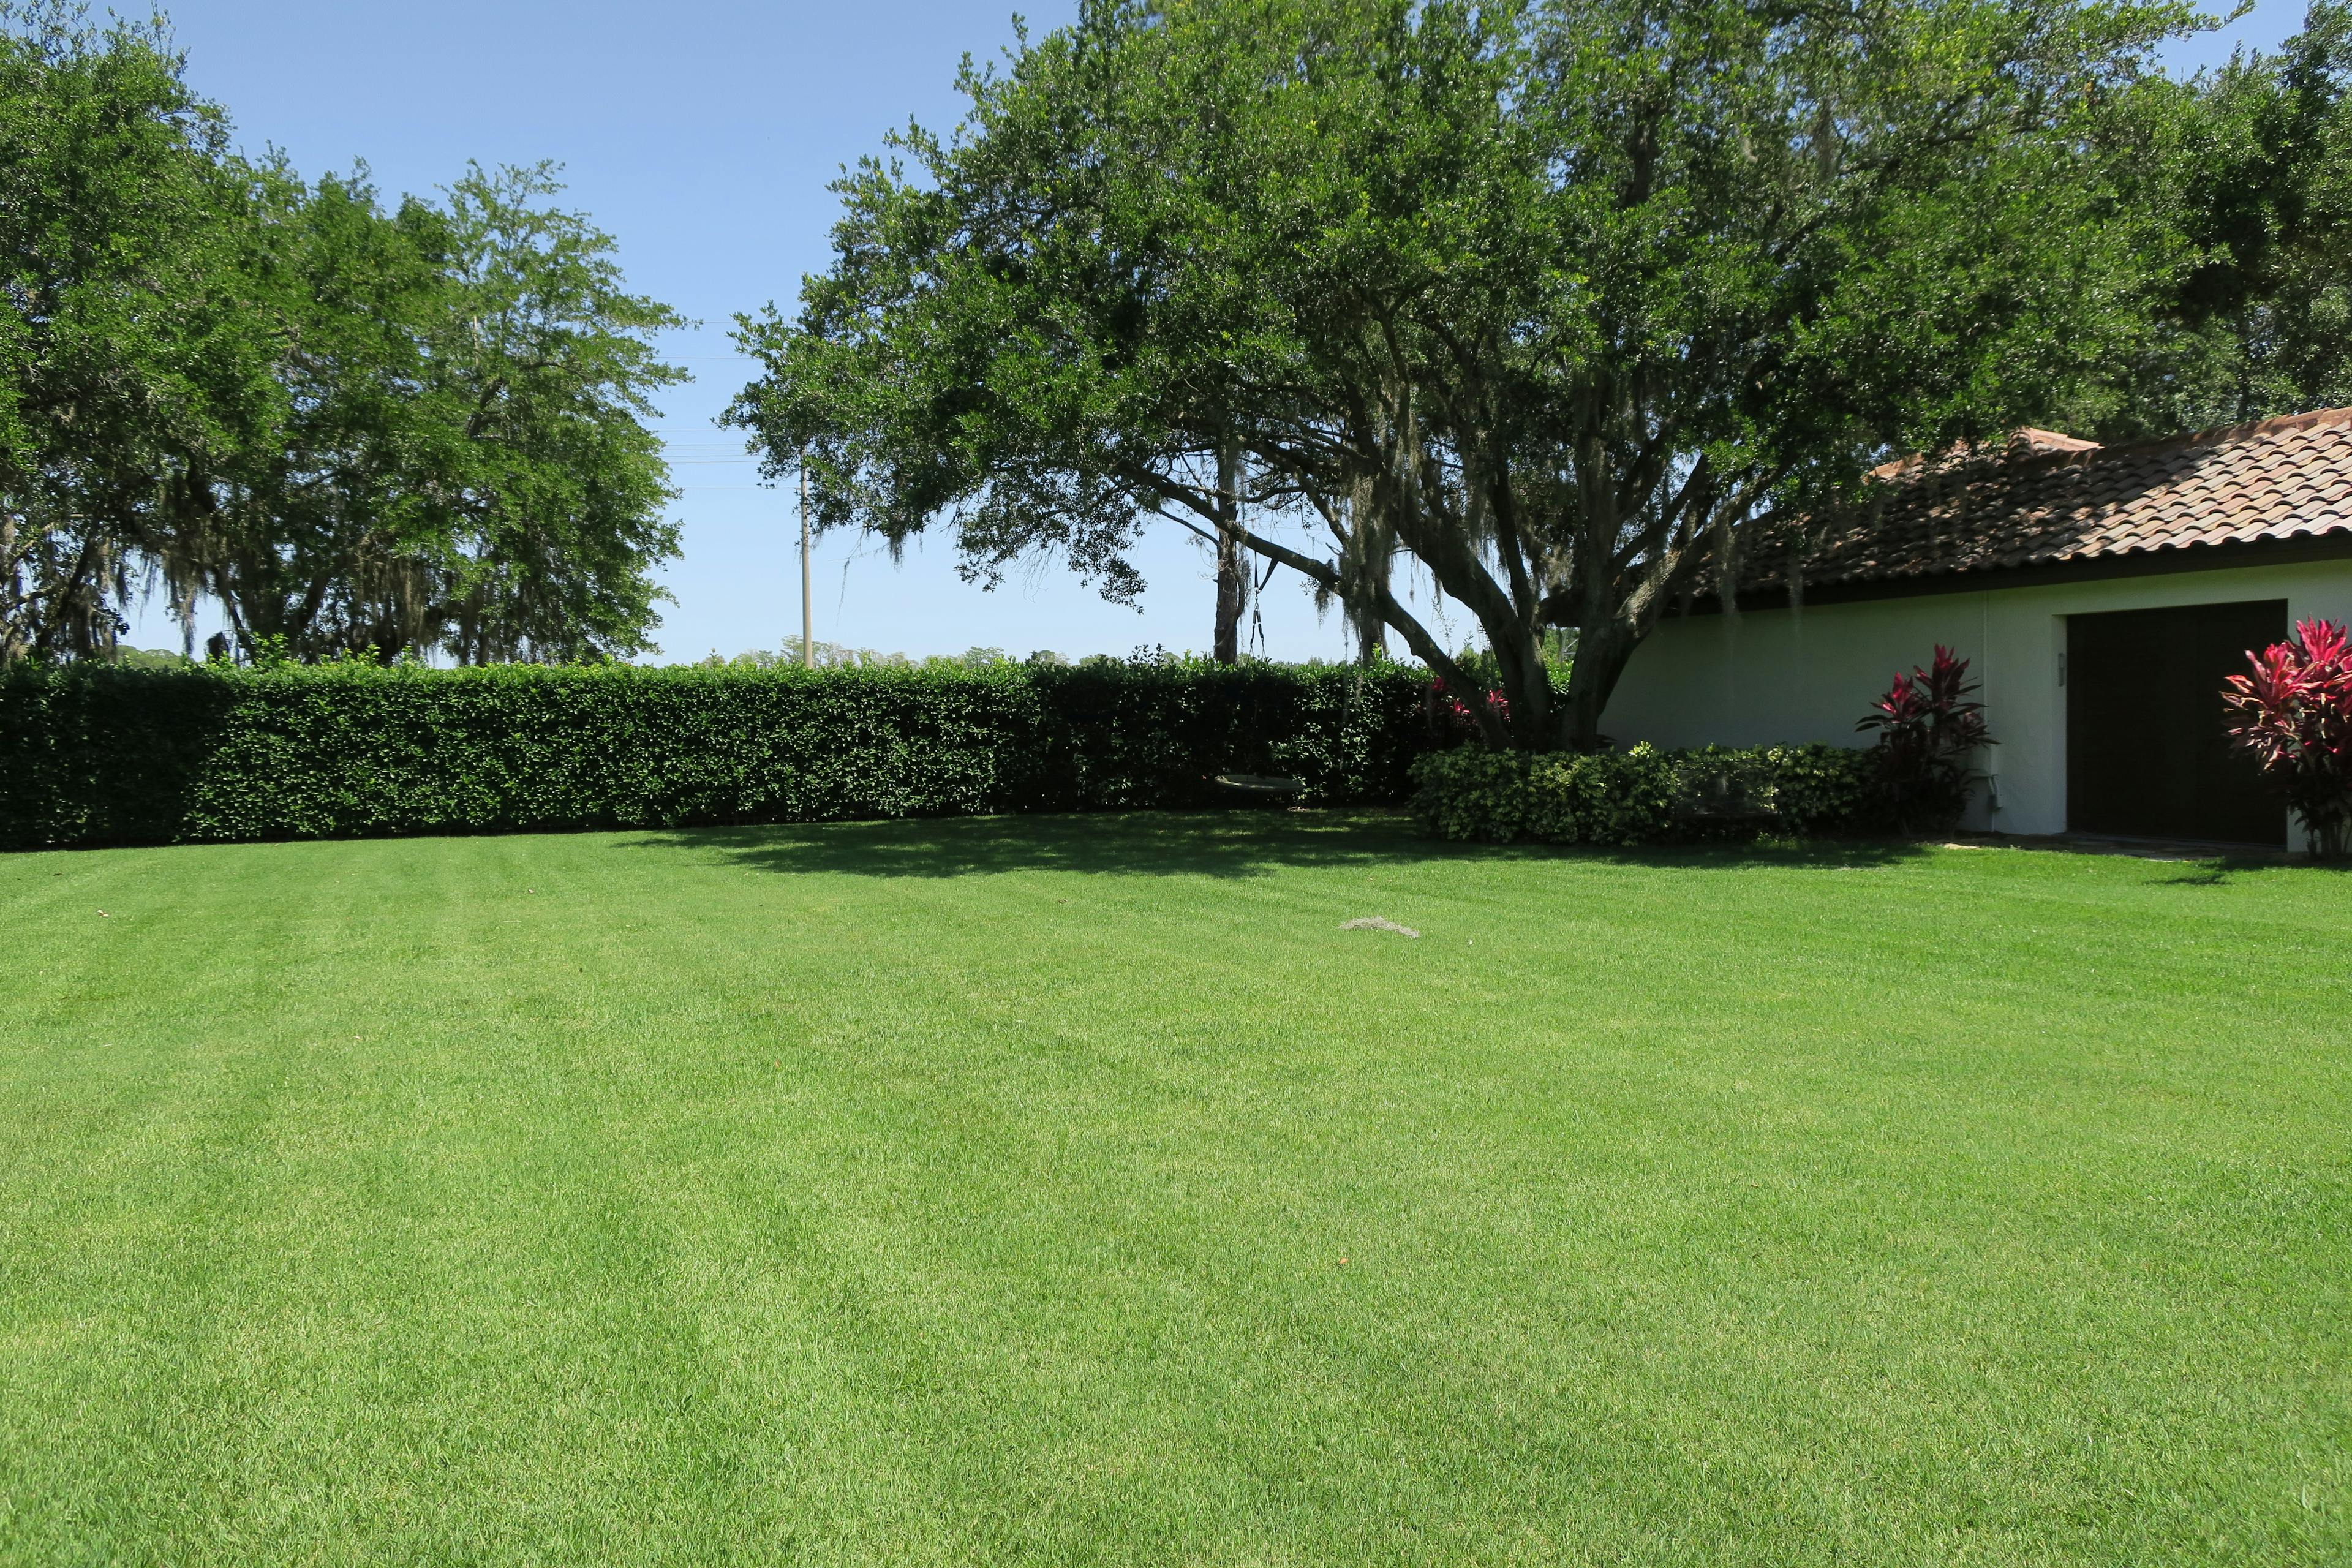 Fortify and Protect Your Lawn, Shrubs and Trees